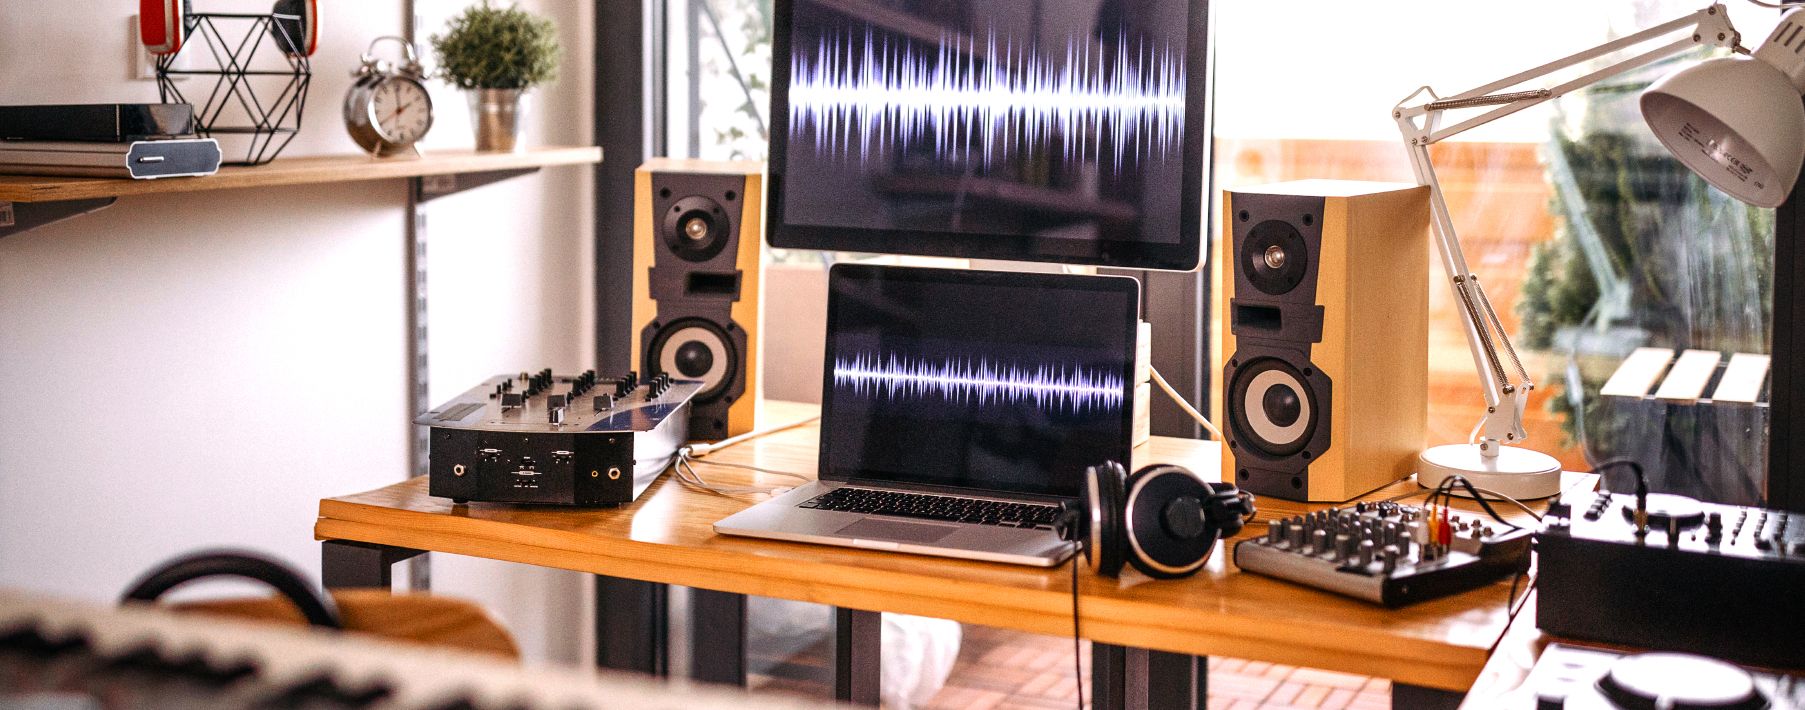 A desk with a laptop, a monitor, speakers and other music equipment